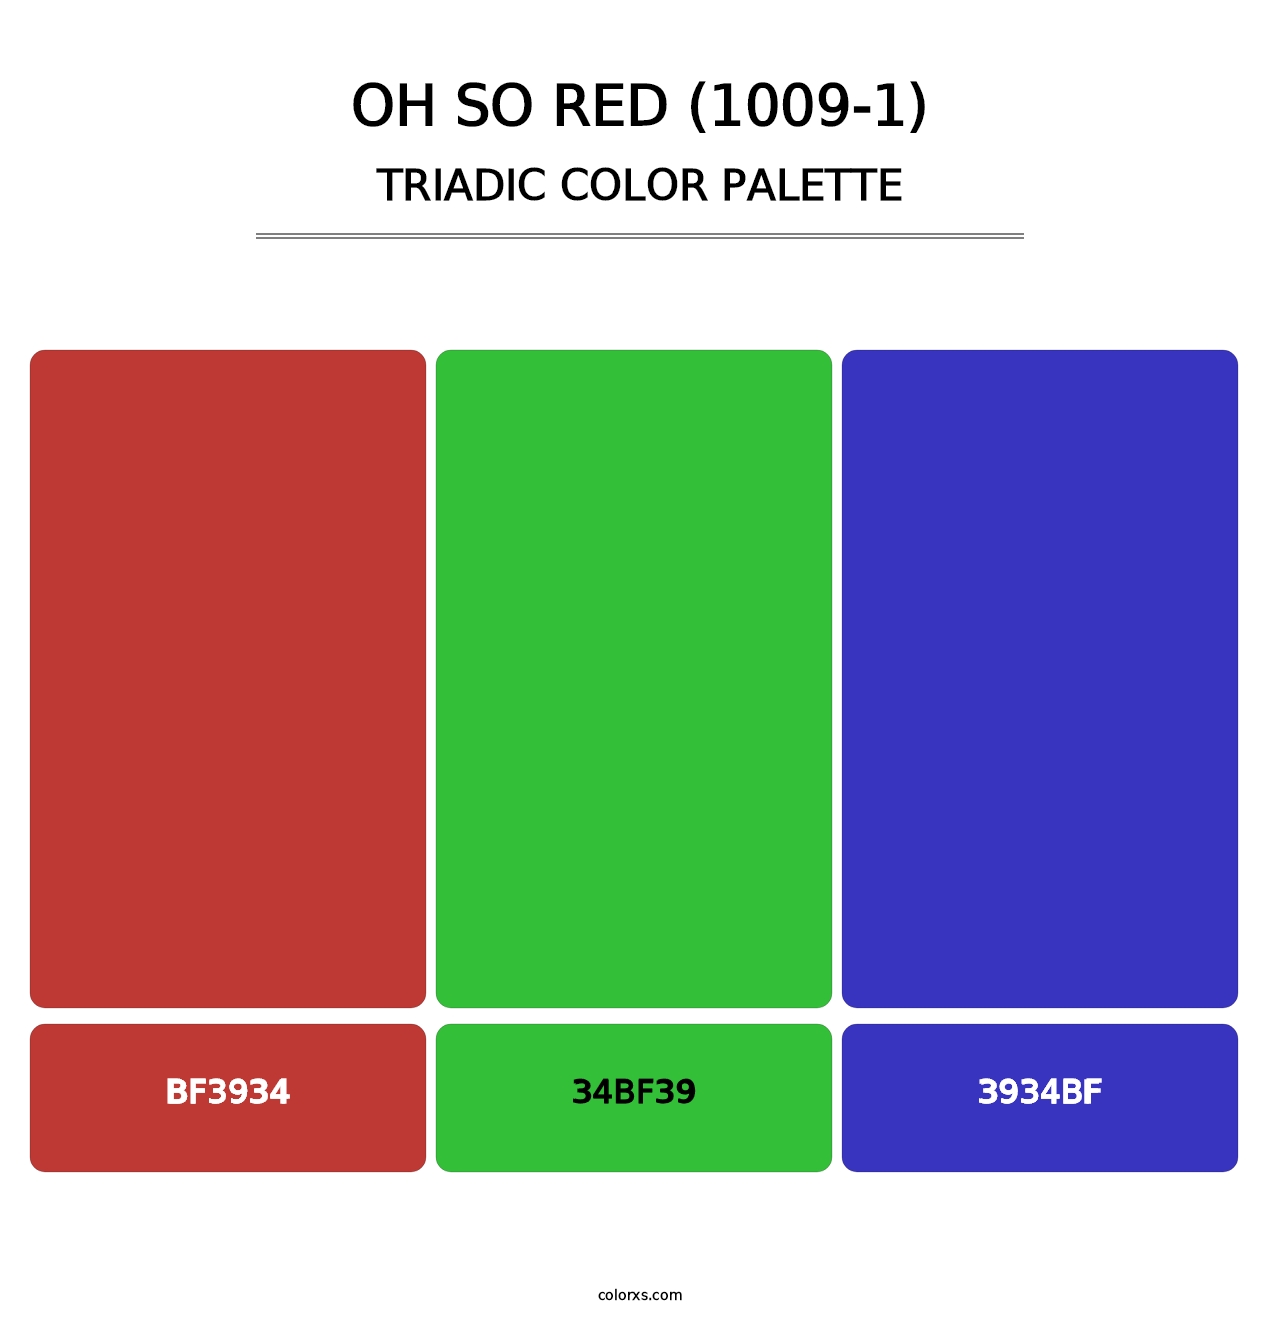 Oh So Red (1009-1) - Triadic Color Palette